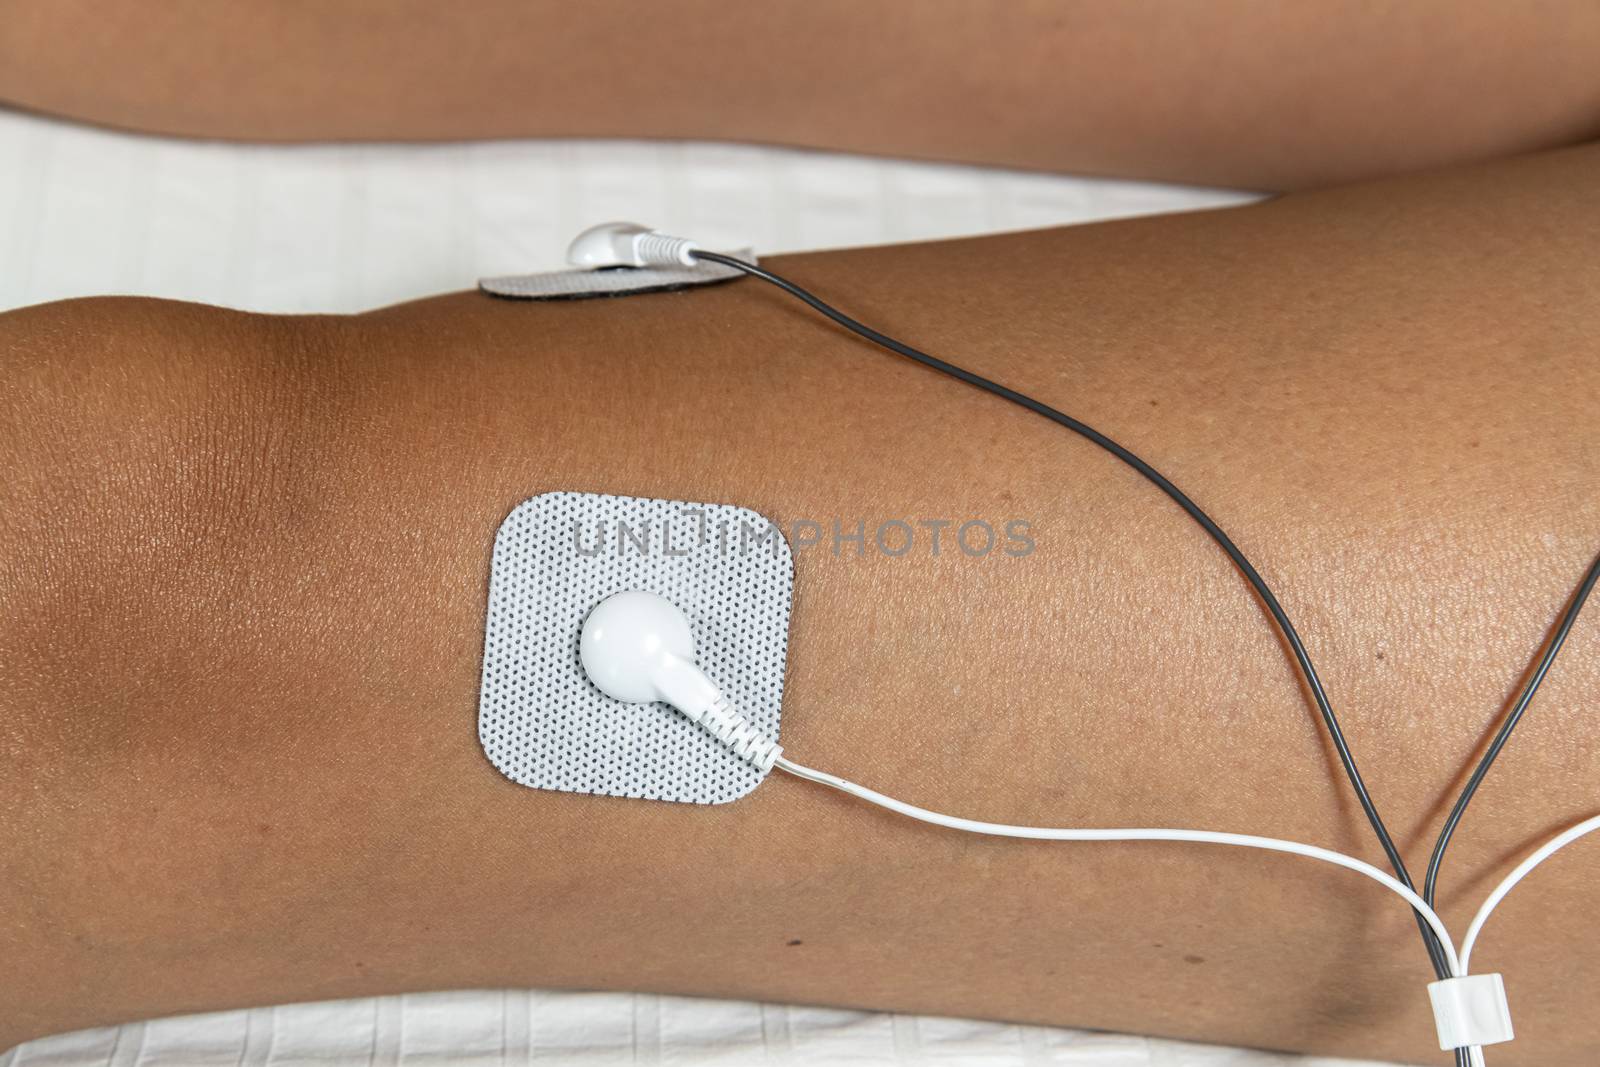 Self Adhesive Electrode Pad of TENS (transcutaneous electrical nerve stimulation) and EMS (electronic muscle stimulation) Unit Therapy Machine